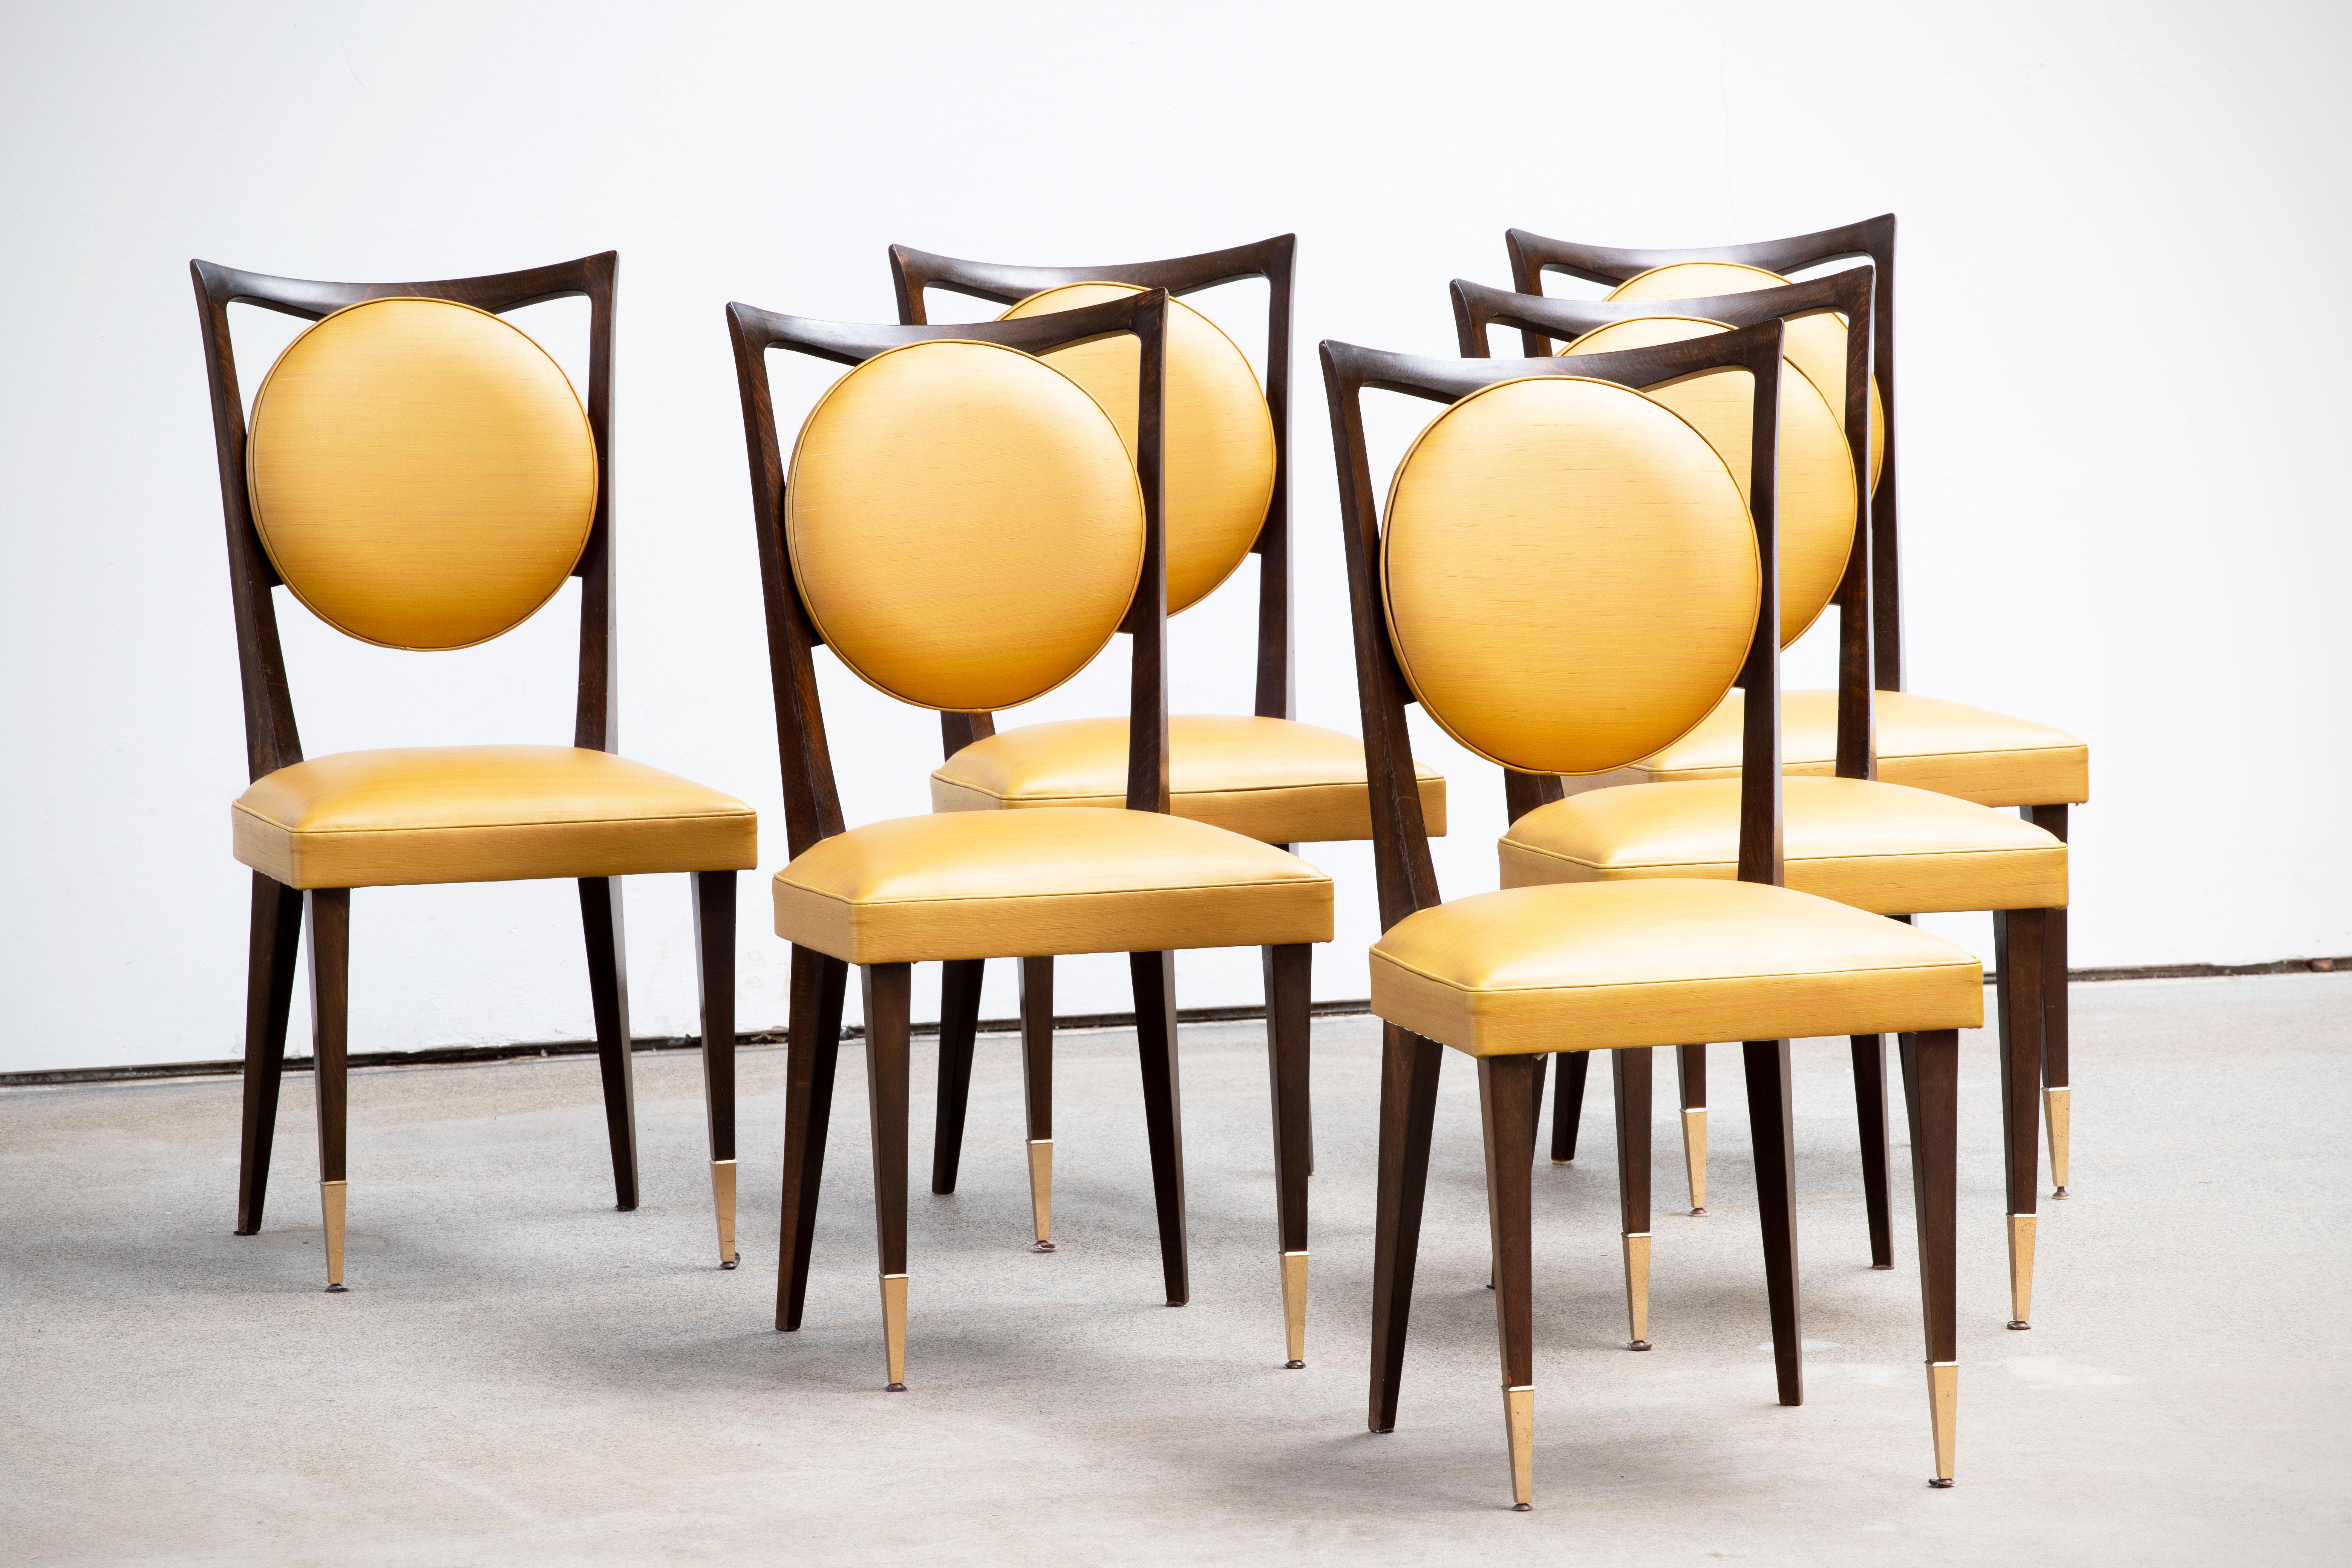 Set of six upholstered high back chairs covered in yellow vynil, exhibiting traditional French design elements in a deep Oak finish. Restored and polished.